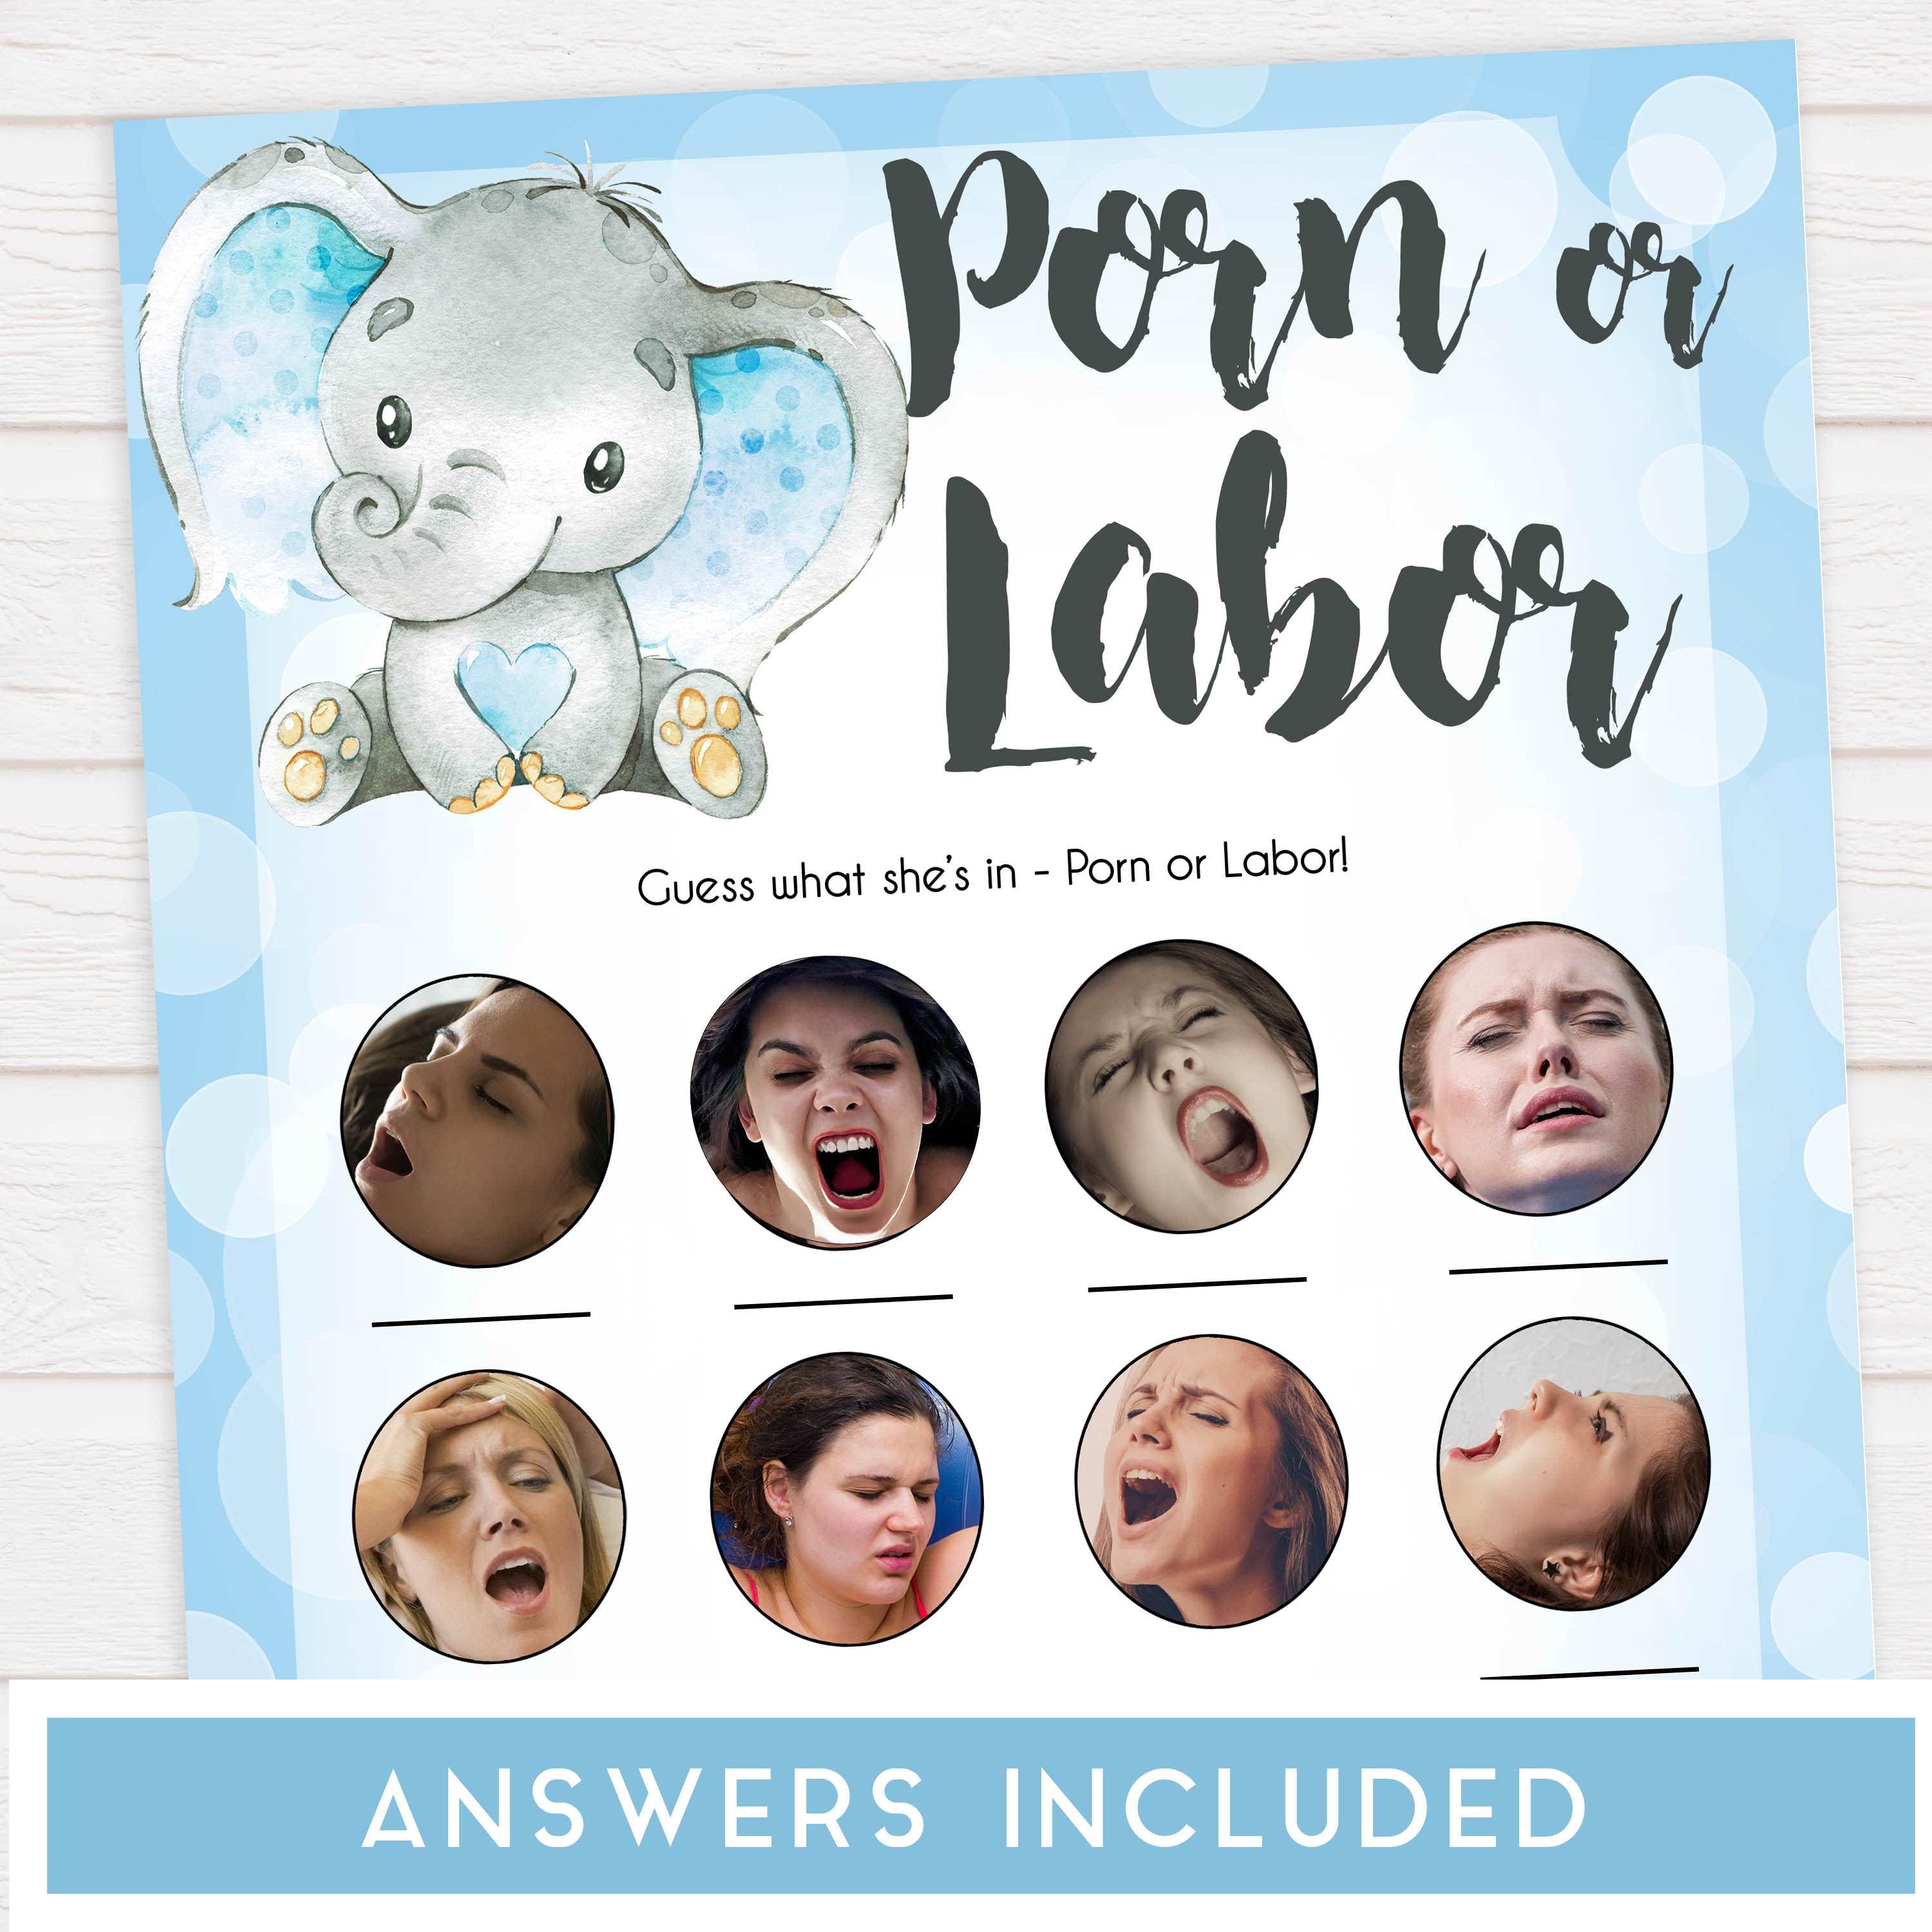 labor or porn, baby bump or beer belly games, Printable baby shower games, fun baby games, baby shower games, fun baby shower ideas, top baby shower ideas, blue elephant baby shower, blue baby shower ideas